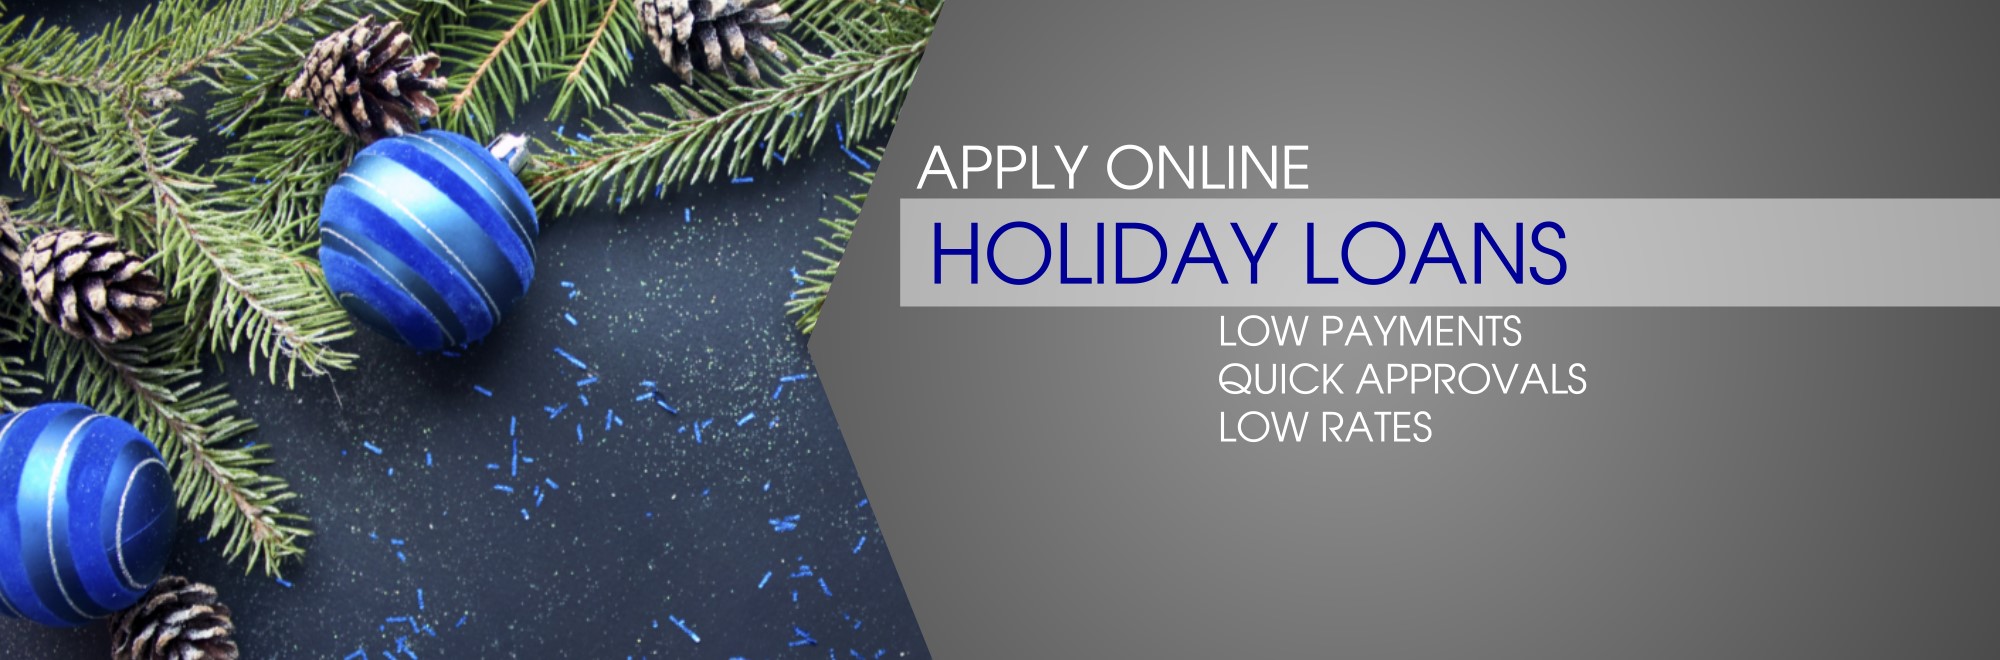 Apply Online Holiday Loans Low Payments, Quick Approvals, Low Rates